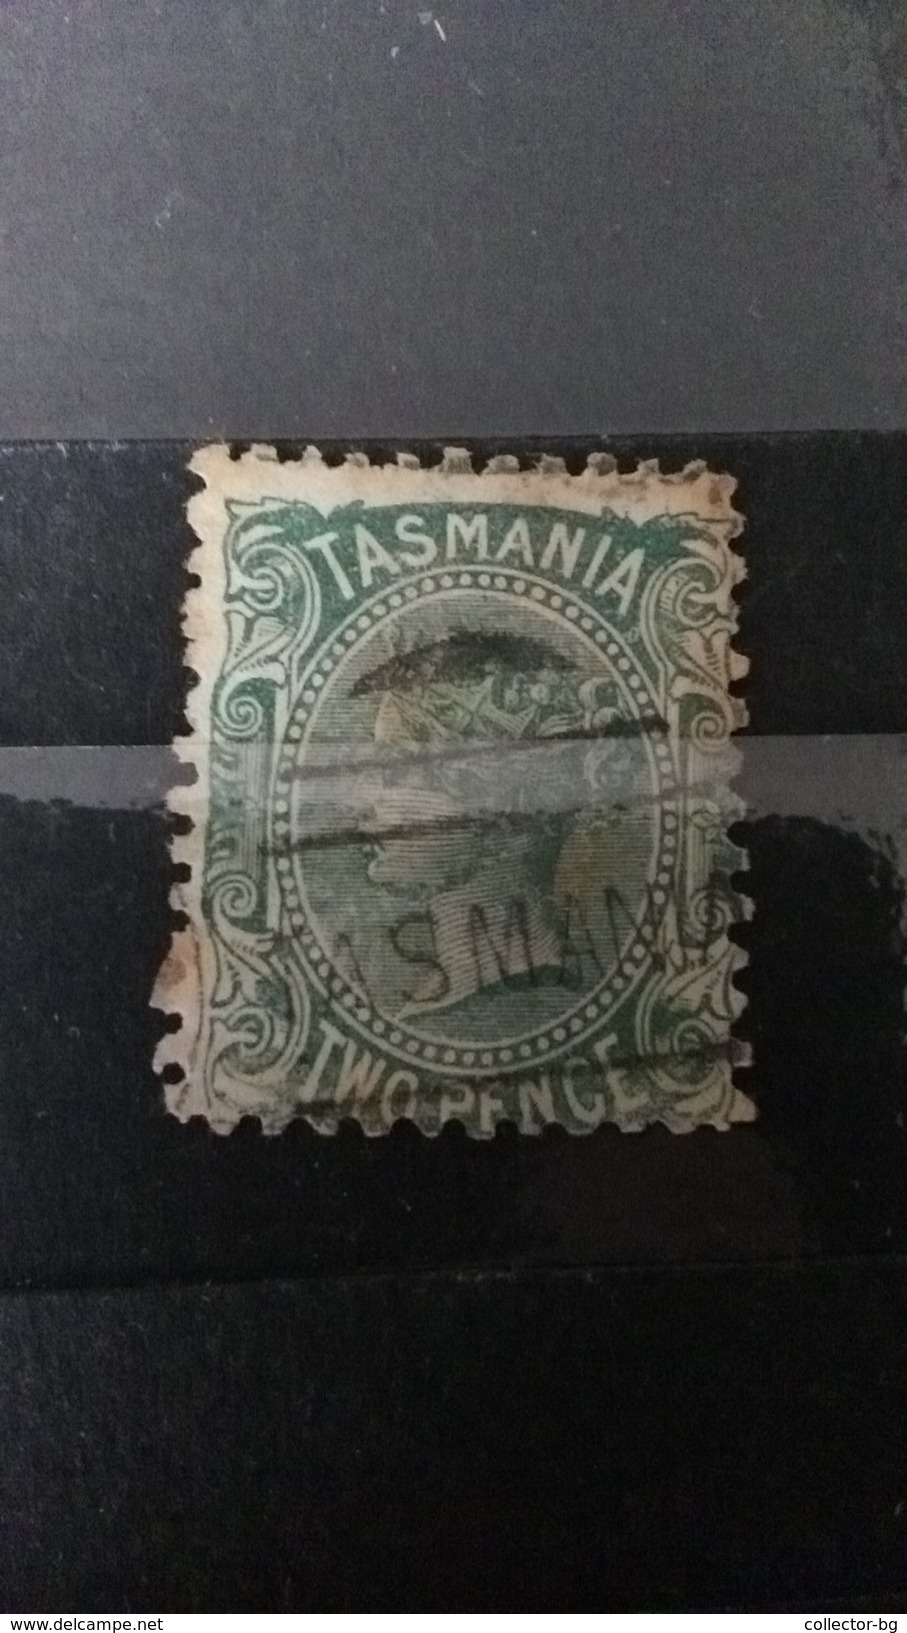 RARE 1870-1900 TWO PENCE QUEEN VICTORIA GREEN WATERMARK SEAL "TASMANIA"  USED  STAMP TIMBRE - Oblitérés